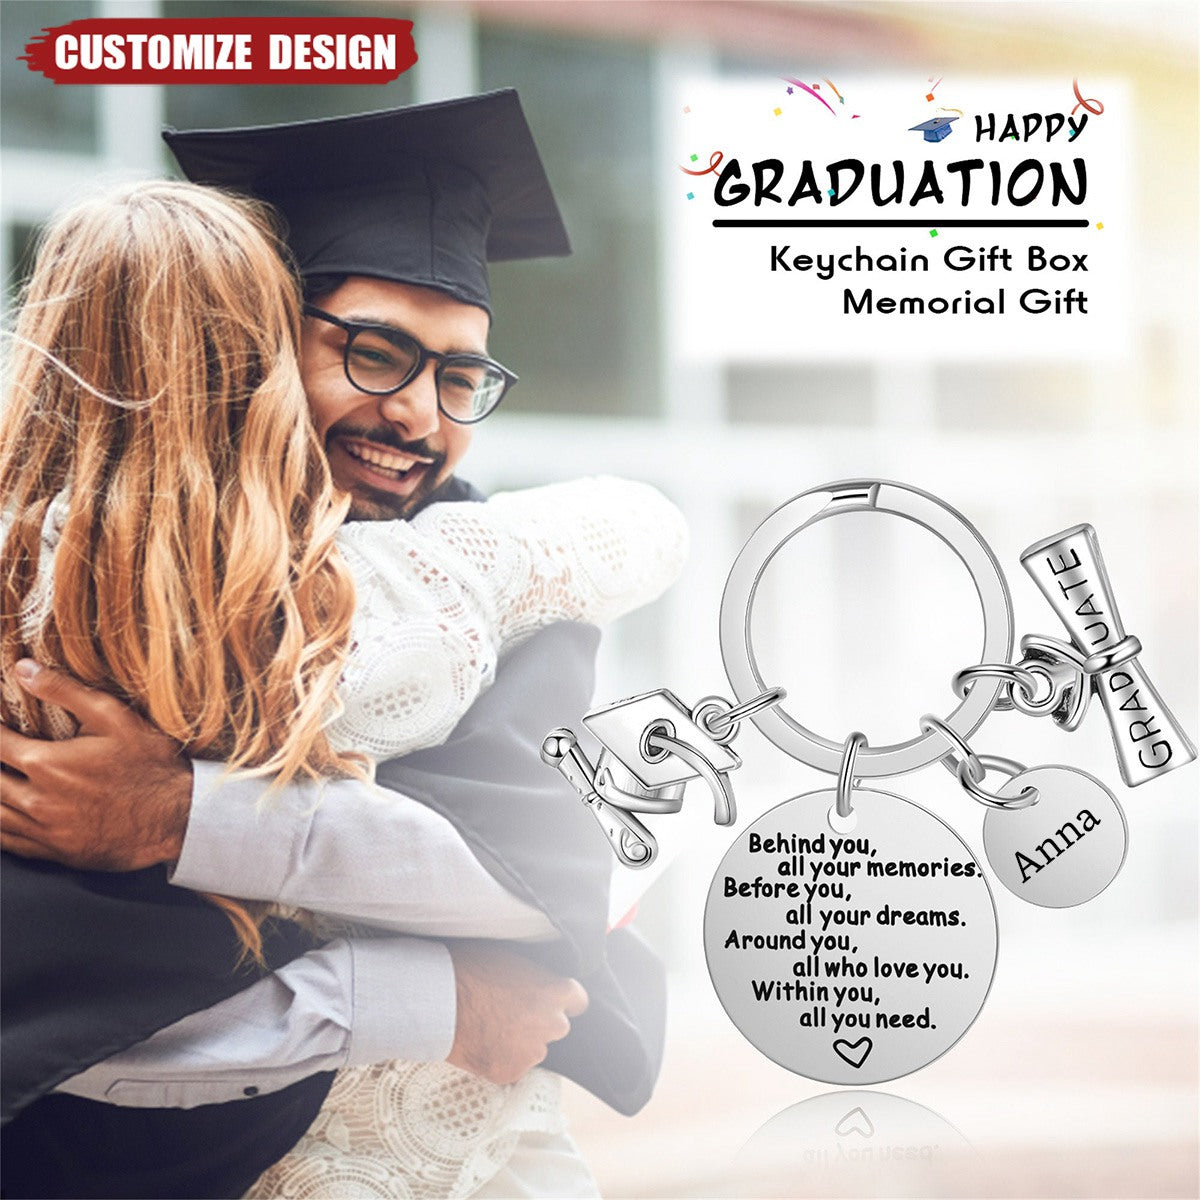 Behind you all your memories - personalized graduation keychain